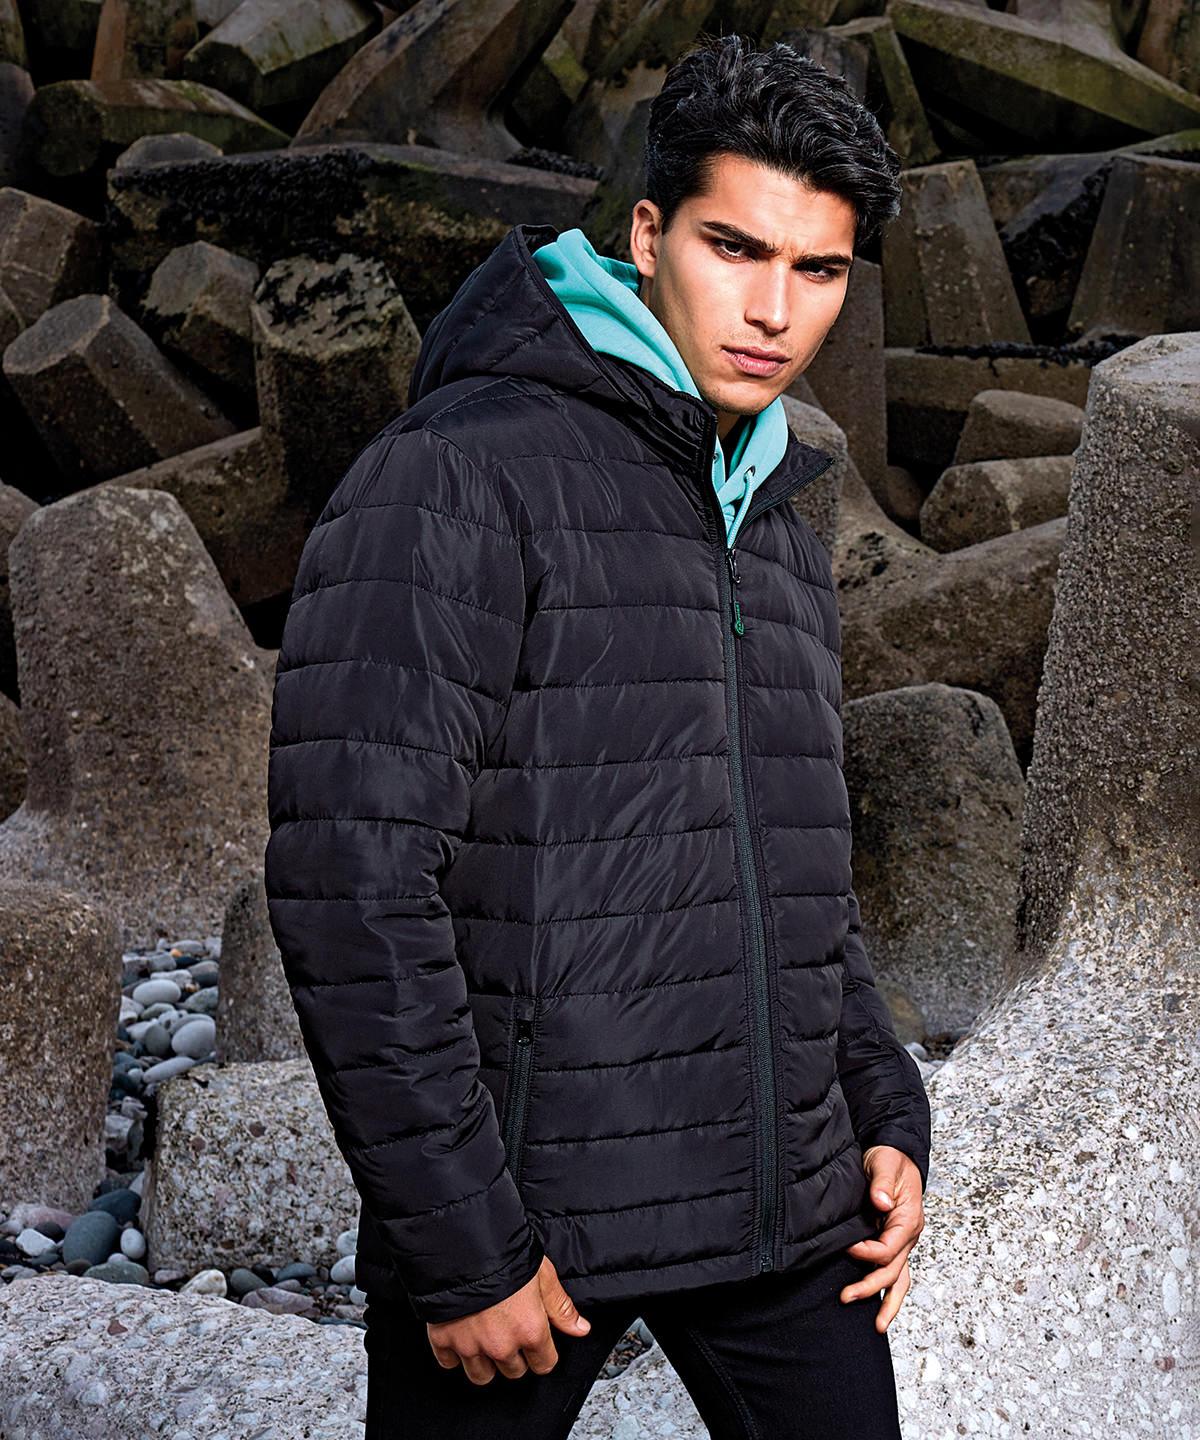 Navy - Delmont recycled padded jacket Jackets 2786 Jackets & Coats, New Styles for 2023, Organic & Conscious, Plus Sizes, Rebrandable Schoolwear Centres